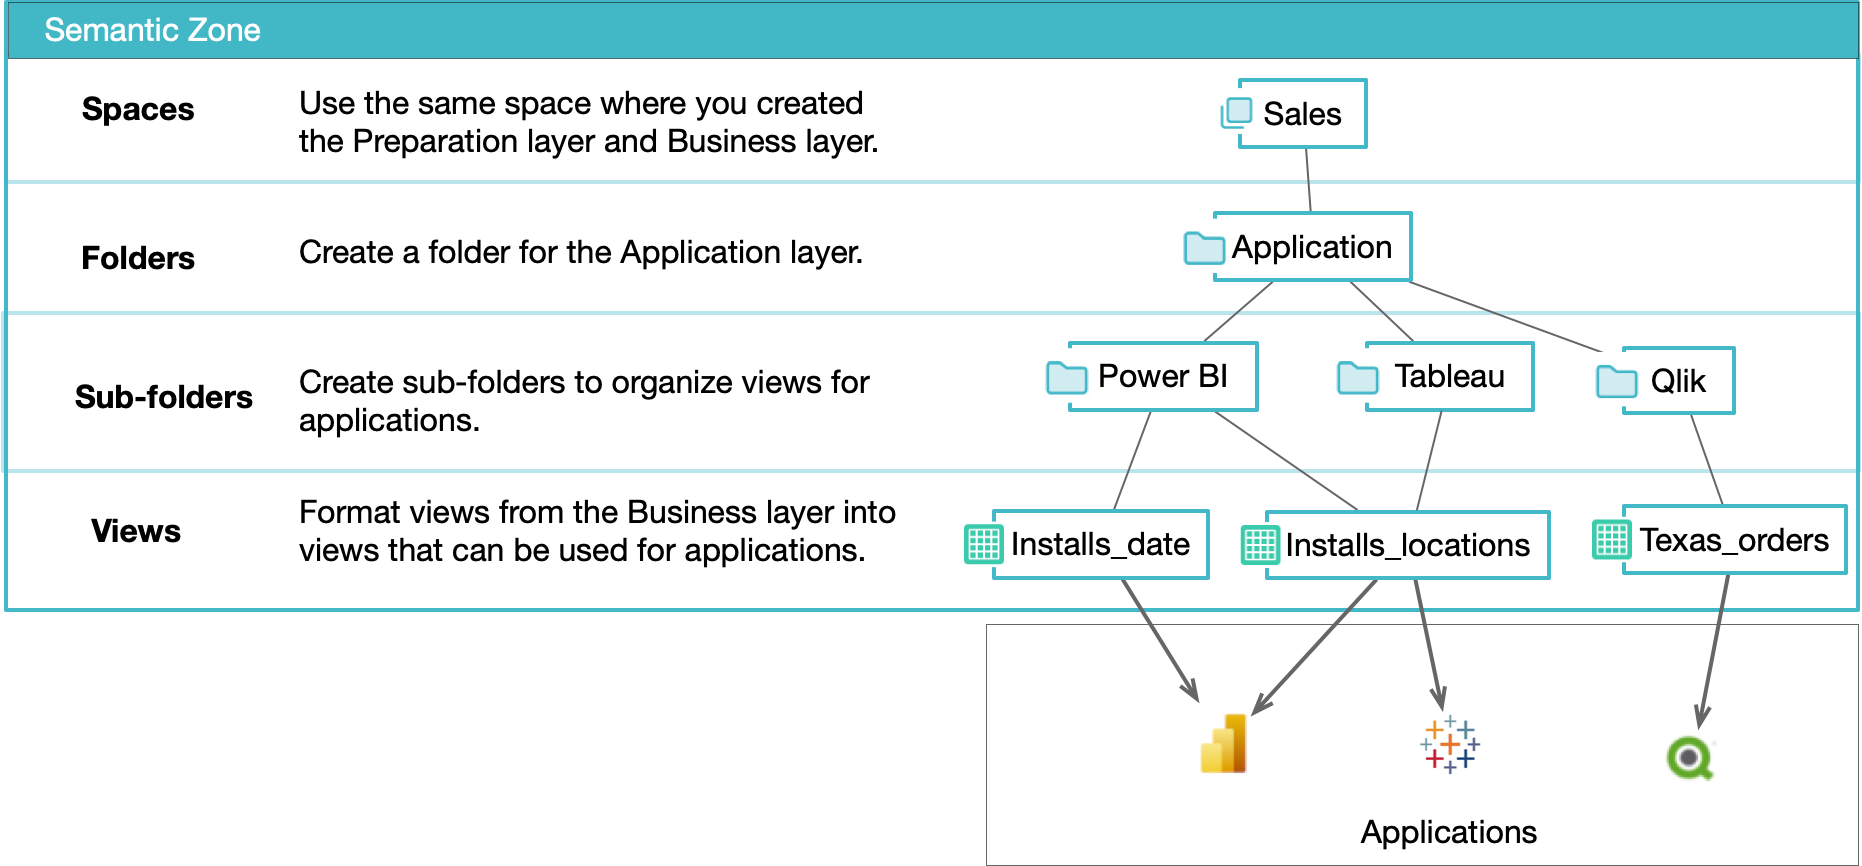 This image shows an example of organizing the Application layer.